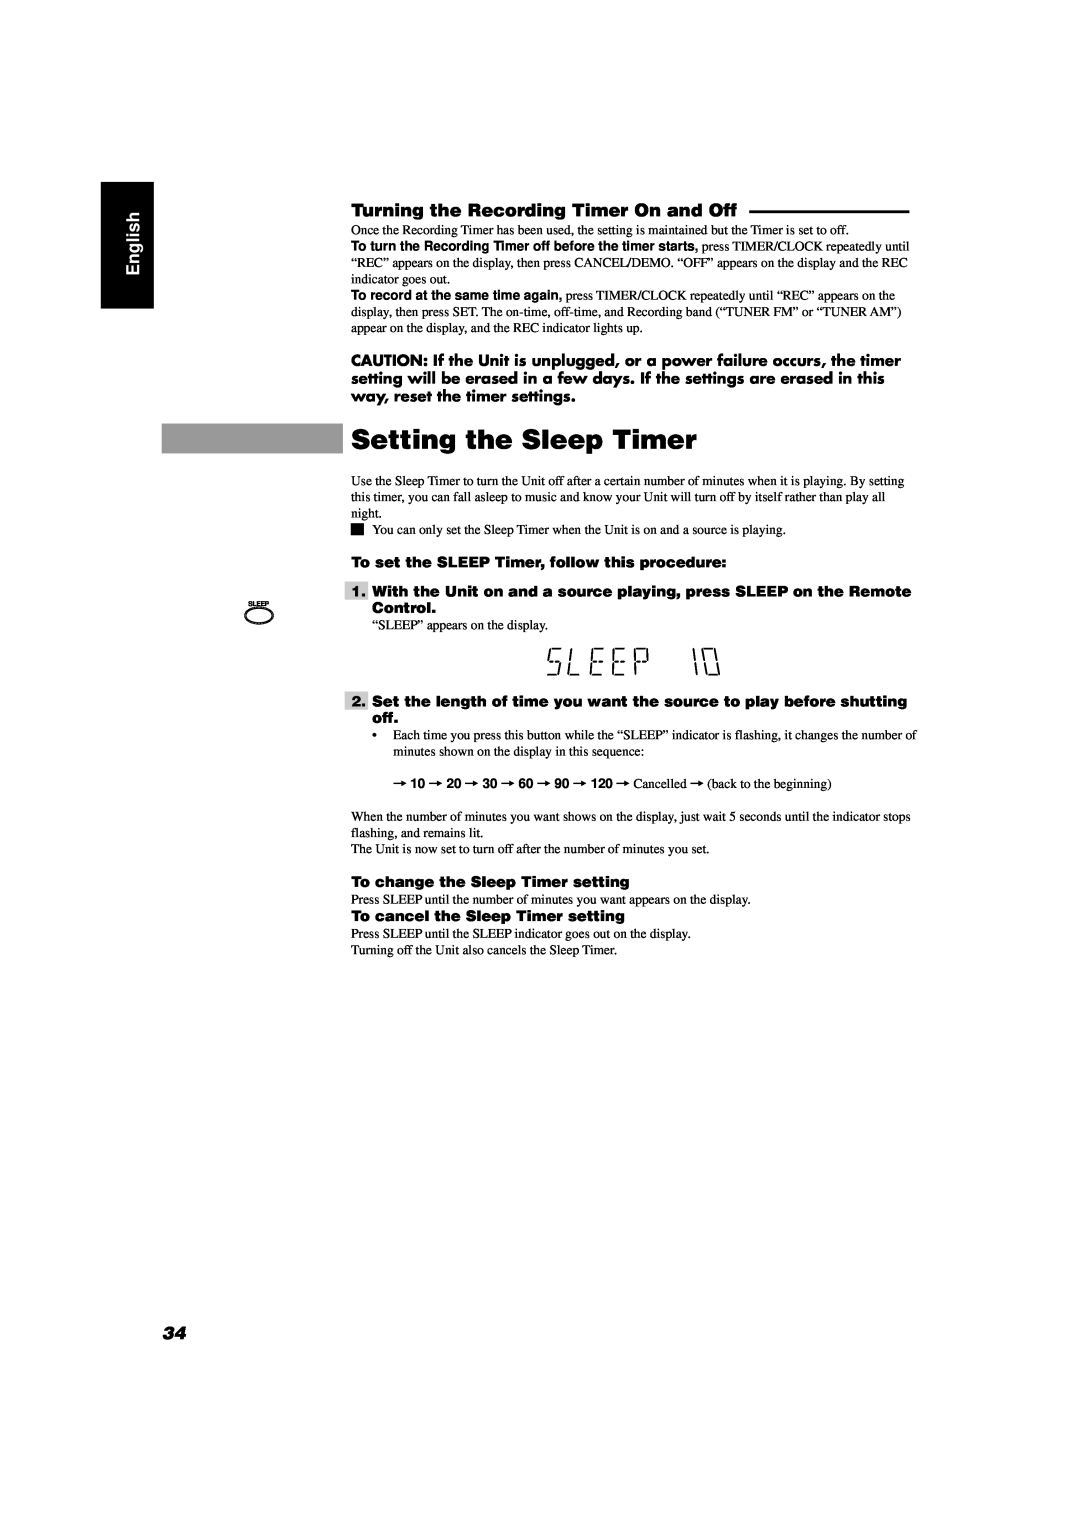 JVC CA-D432TR Setting the Sleep Timer, Turning the Recording Timer On and Off, English, To change the Sleep Timer setting 